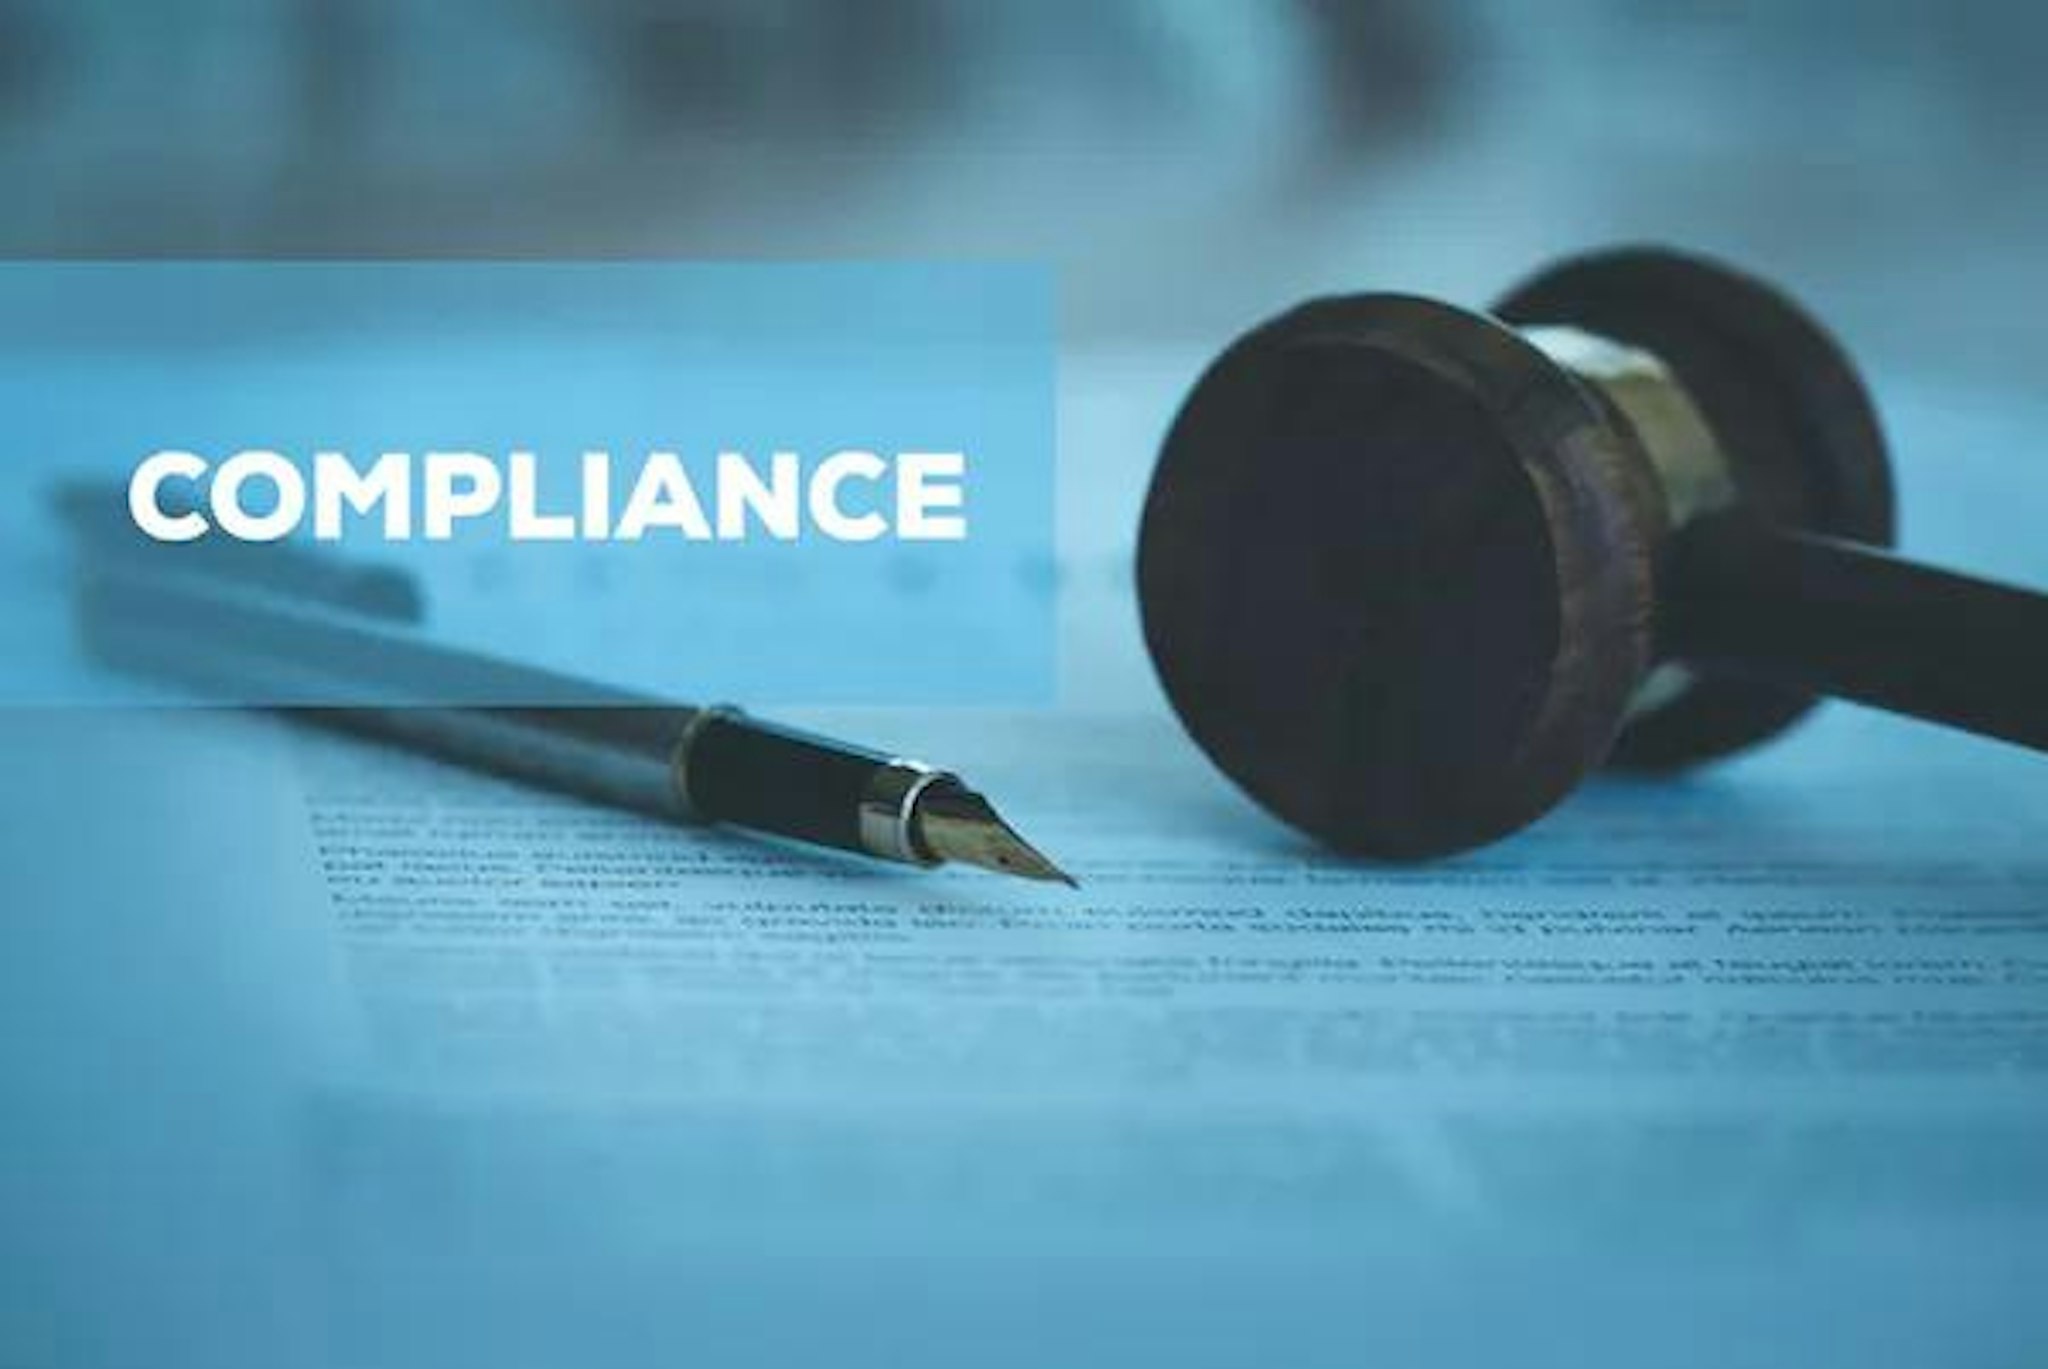 Image representing legal compliance with copy saying "compliance"